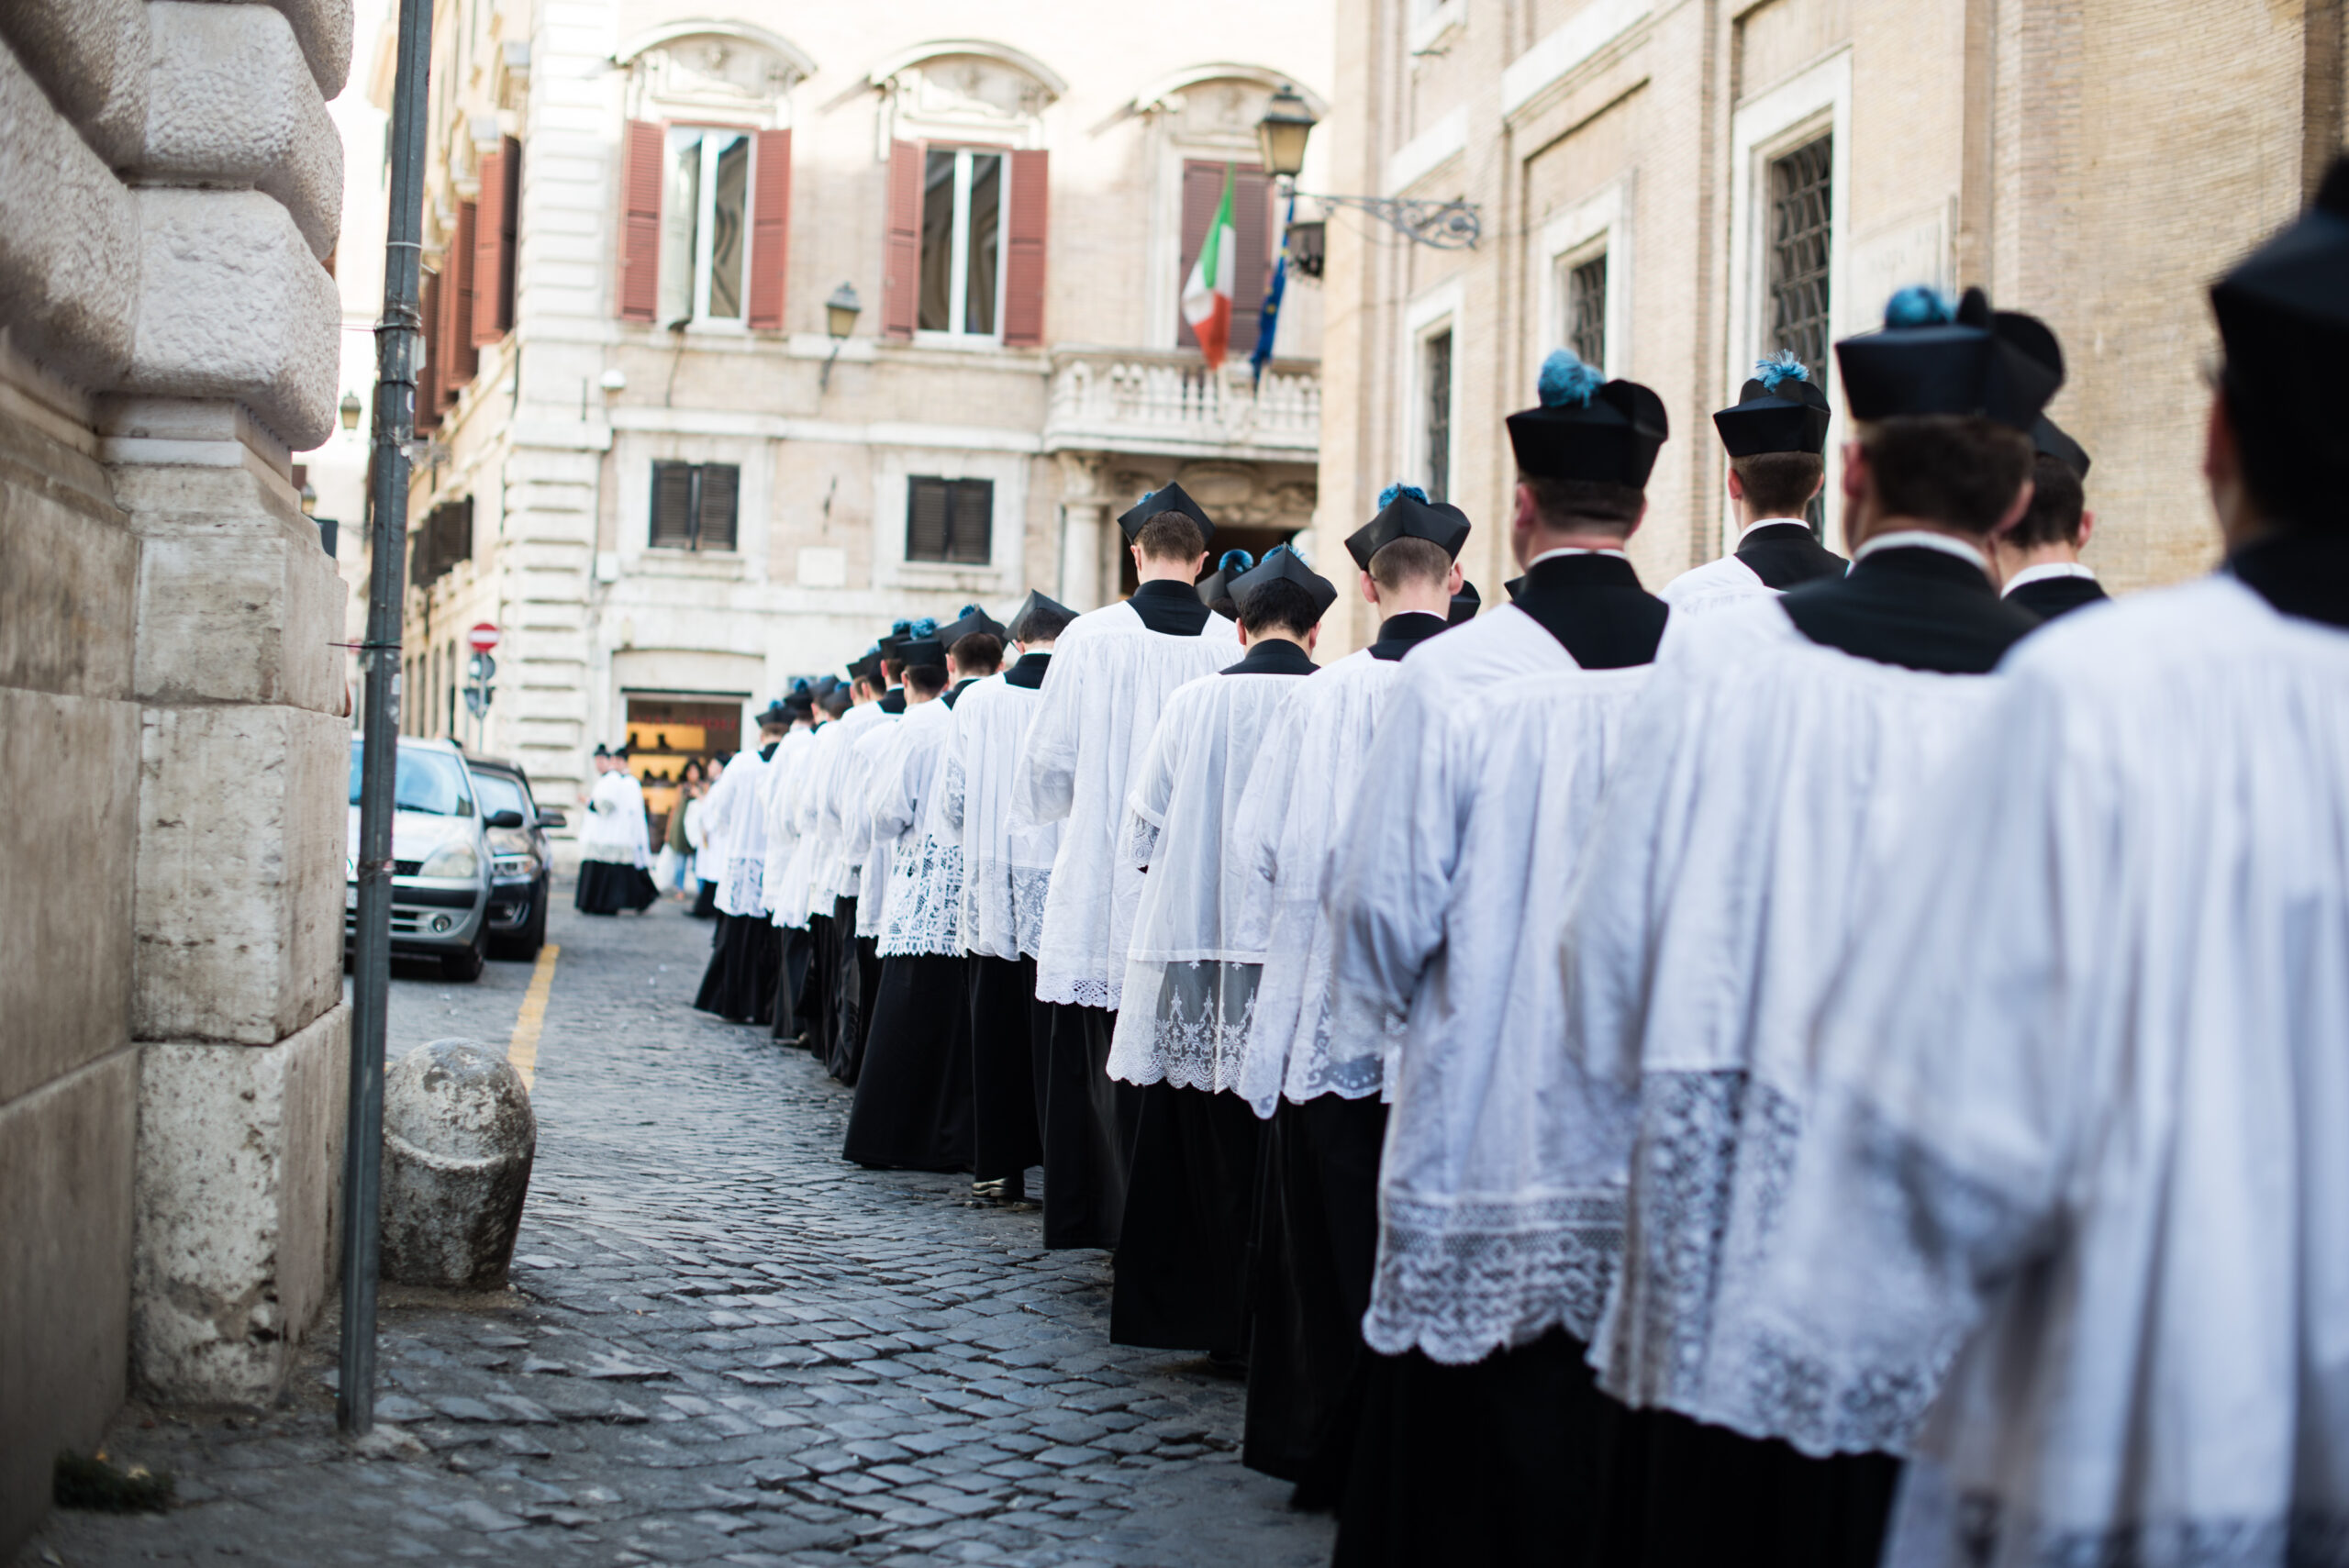 Clericalism – Curing the ‘Disease’